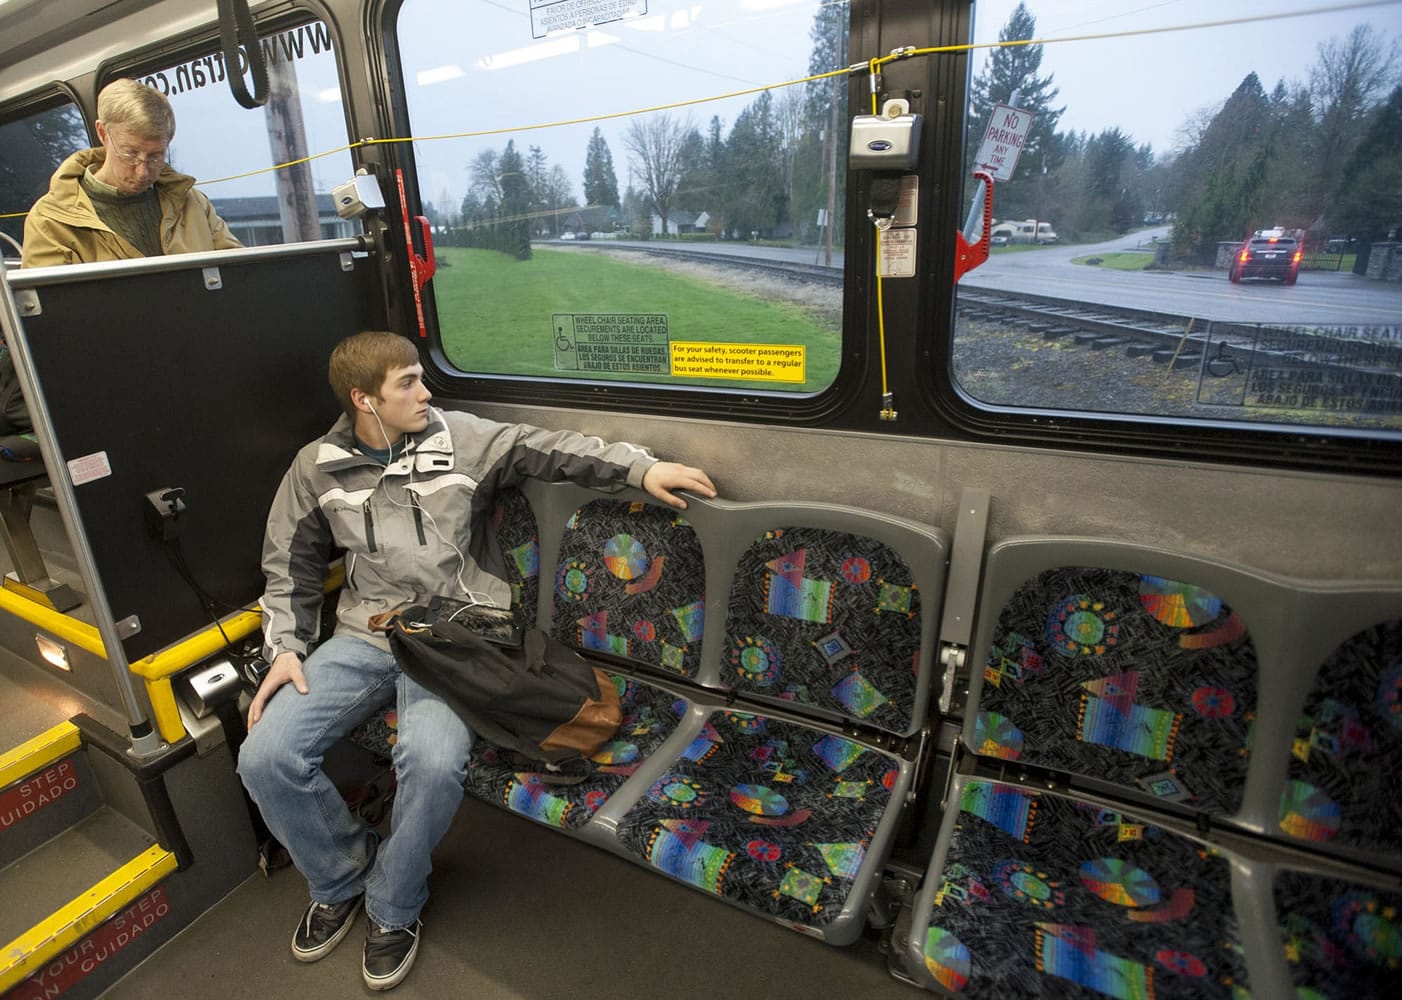 Student James West rides C-Tran's No. 47 bus to Yacolt earlier this year.